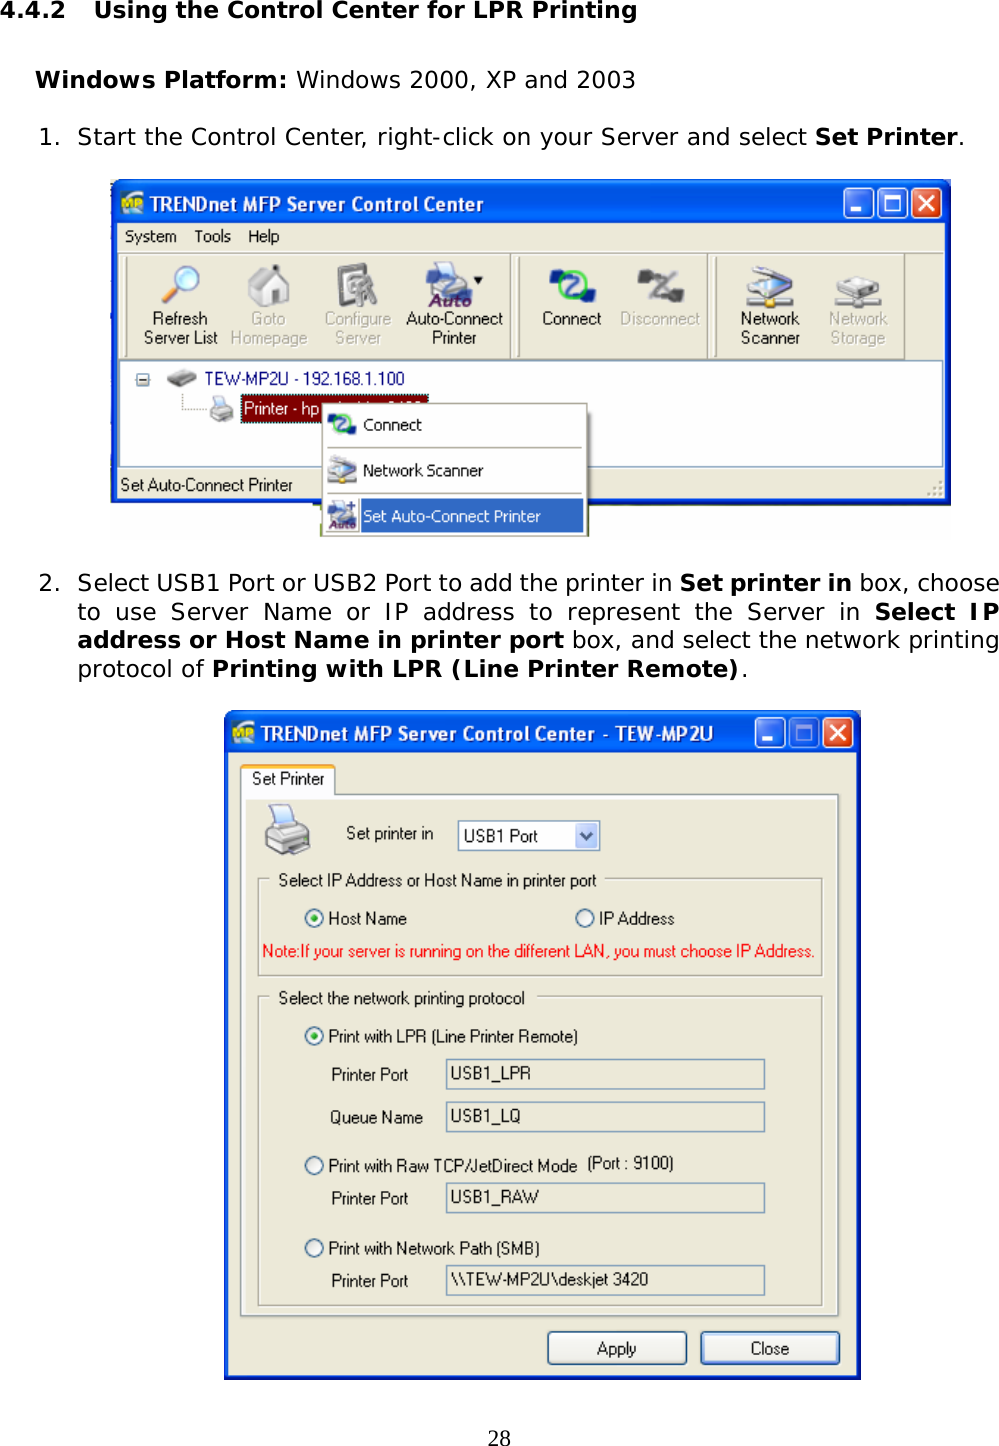     284.4.2 Using the Control Center for LPR Printing  Windows Platform: Windows 2000, XP and 2003 1. Start the Control Center, right-click on your Server and select Set Printer.    2. Select USB1 Port or USB2 Port to add the printer in Set printer in box, choose to use Server Name or IP address to represent the Server in Select IP address or Host Name in printer port box, and select the network printing protocol of Printing with LPR (Line Printer Remote).      